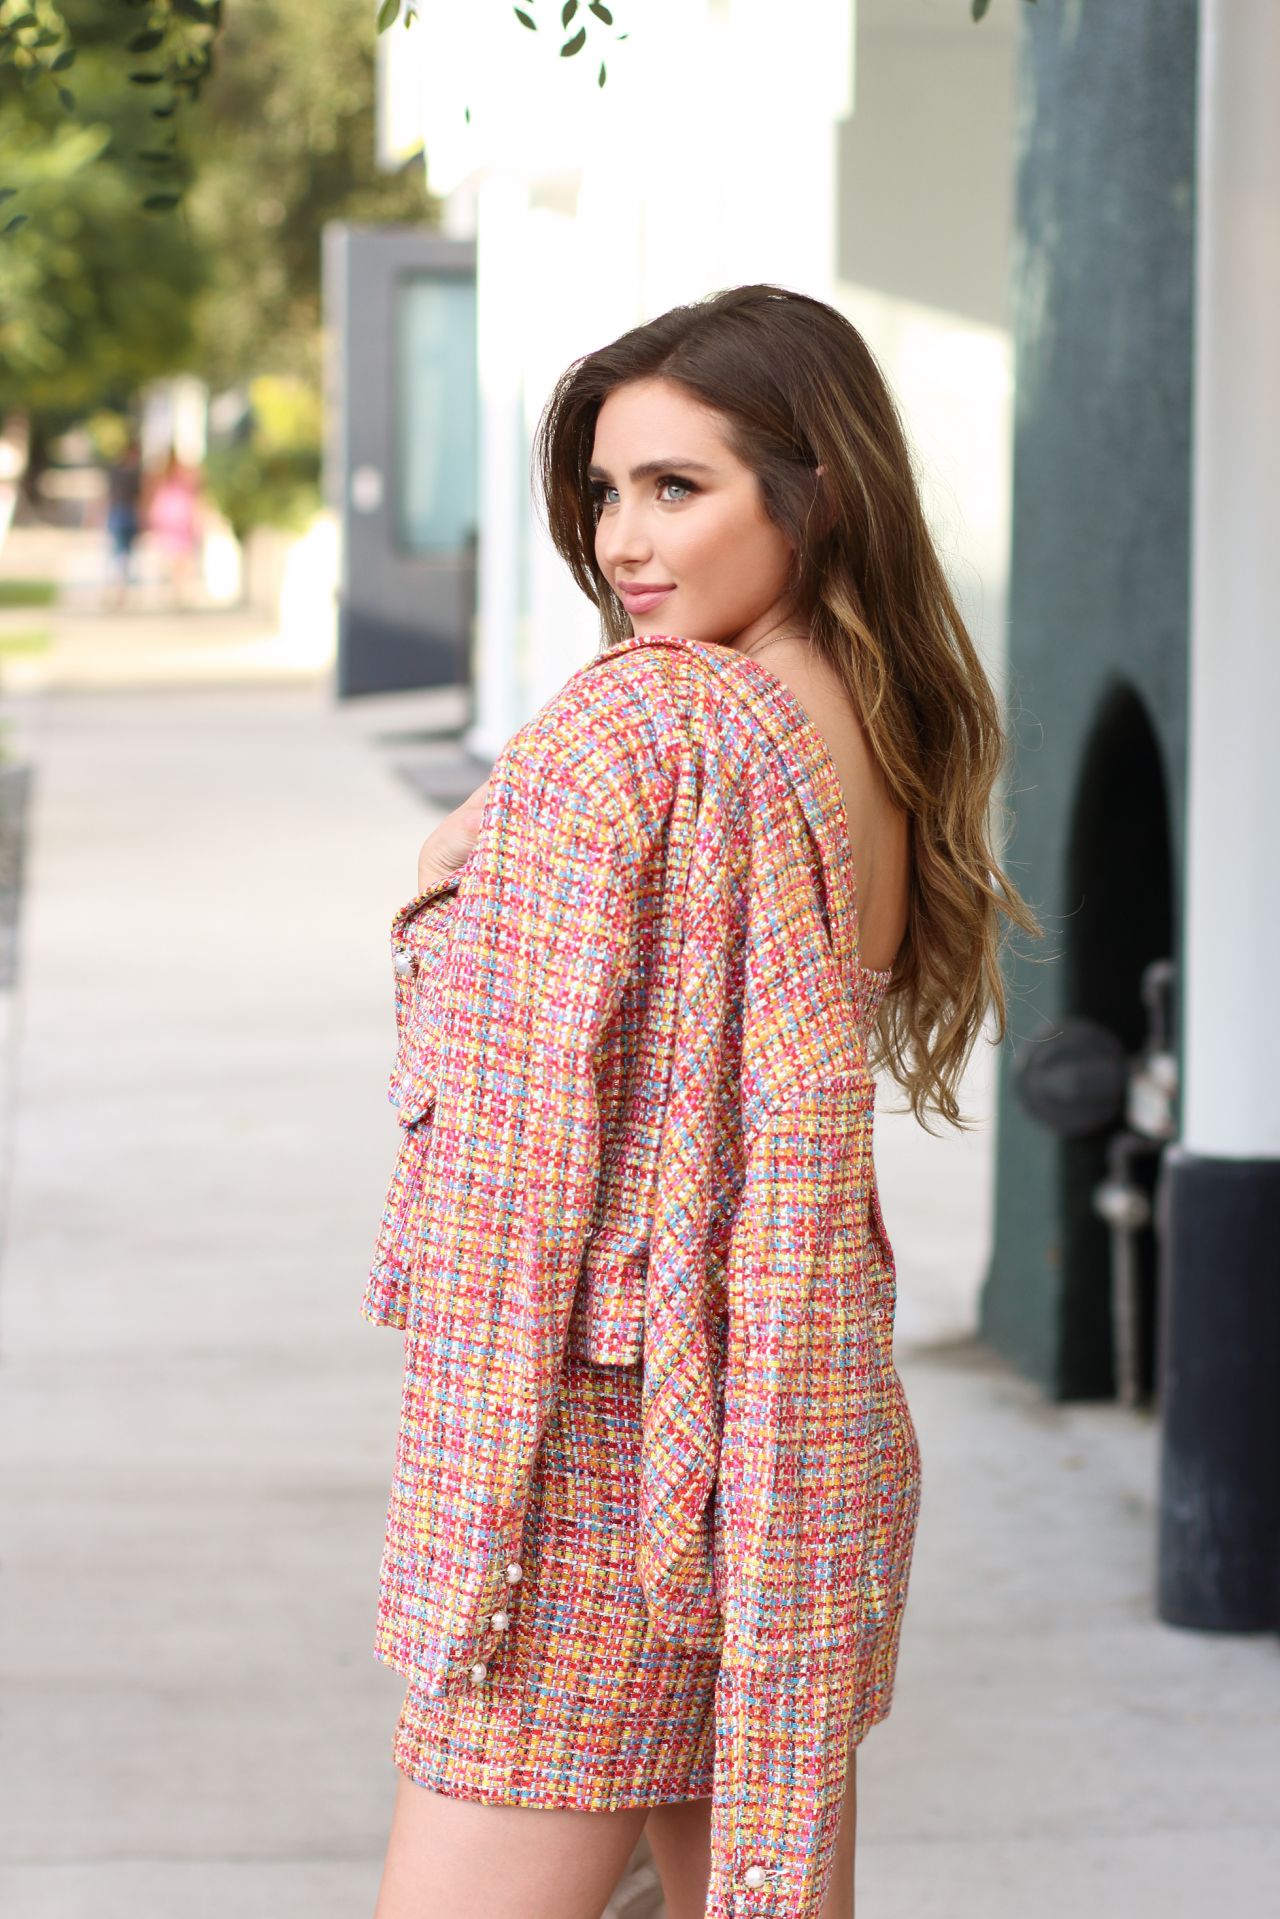 Ryan Newman - Photoshoot in Los Angeles, September 2019.